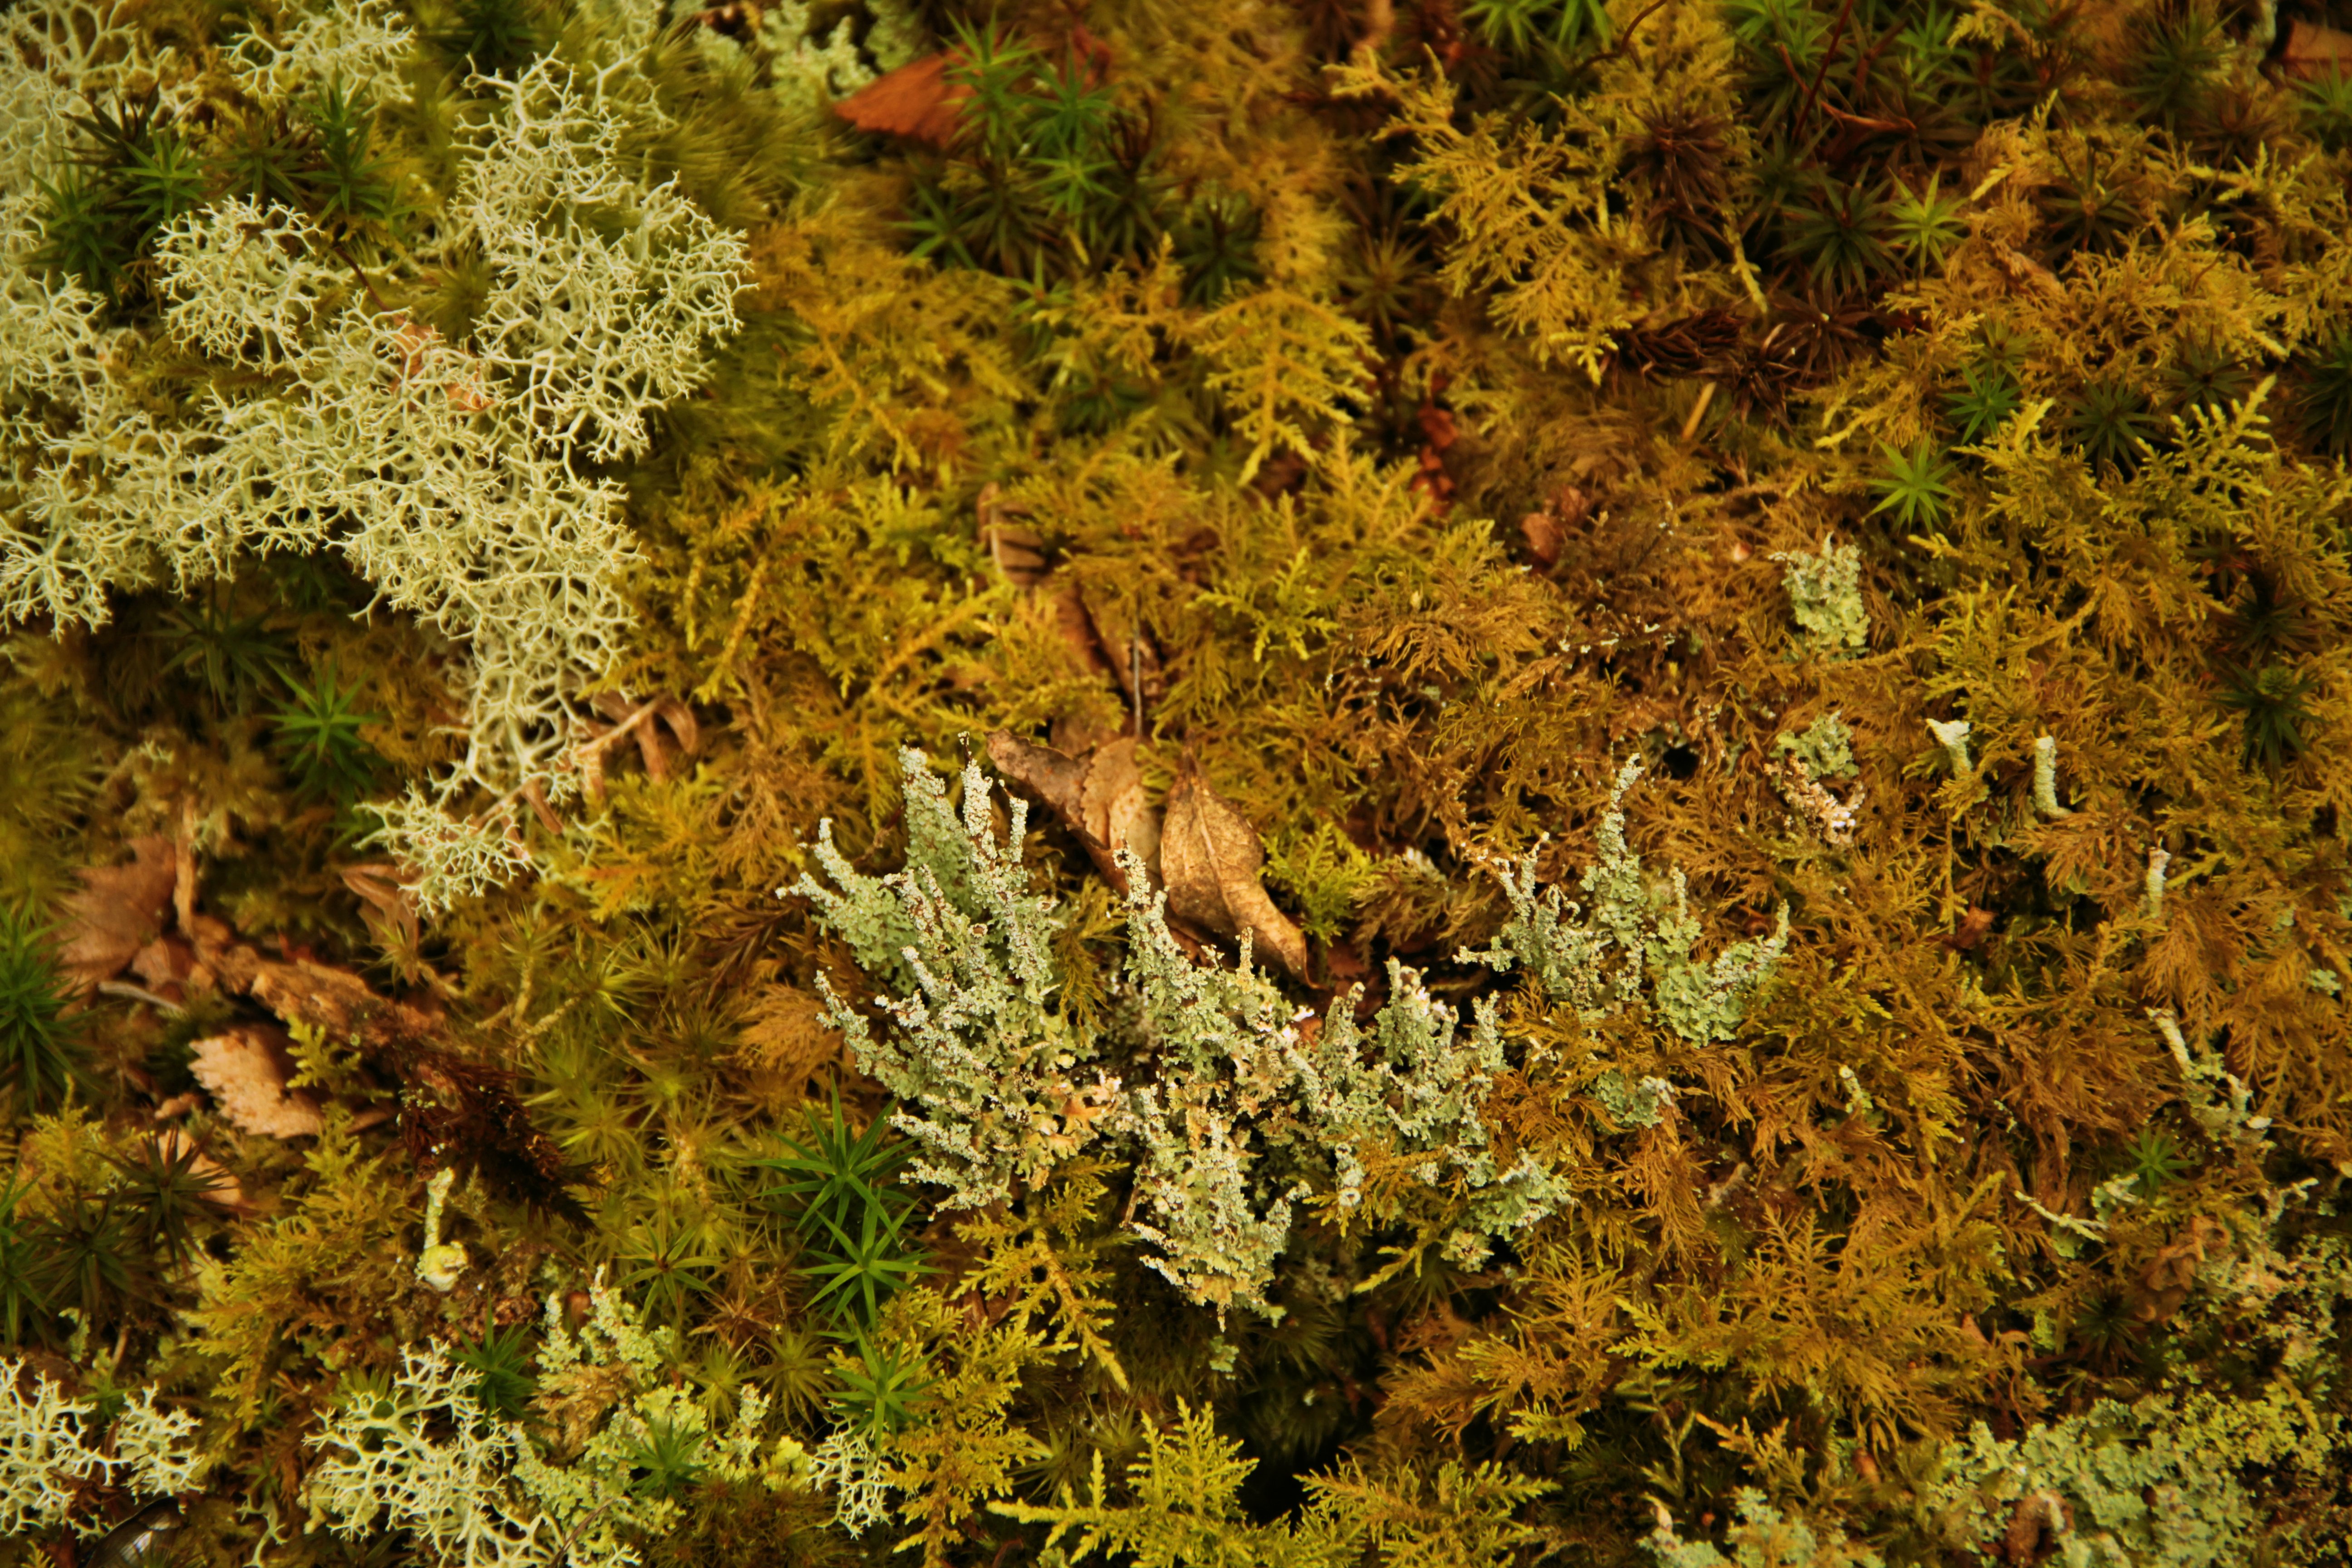 A carpet of moss and fungi in Ceunant Llennyrch.